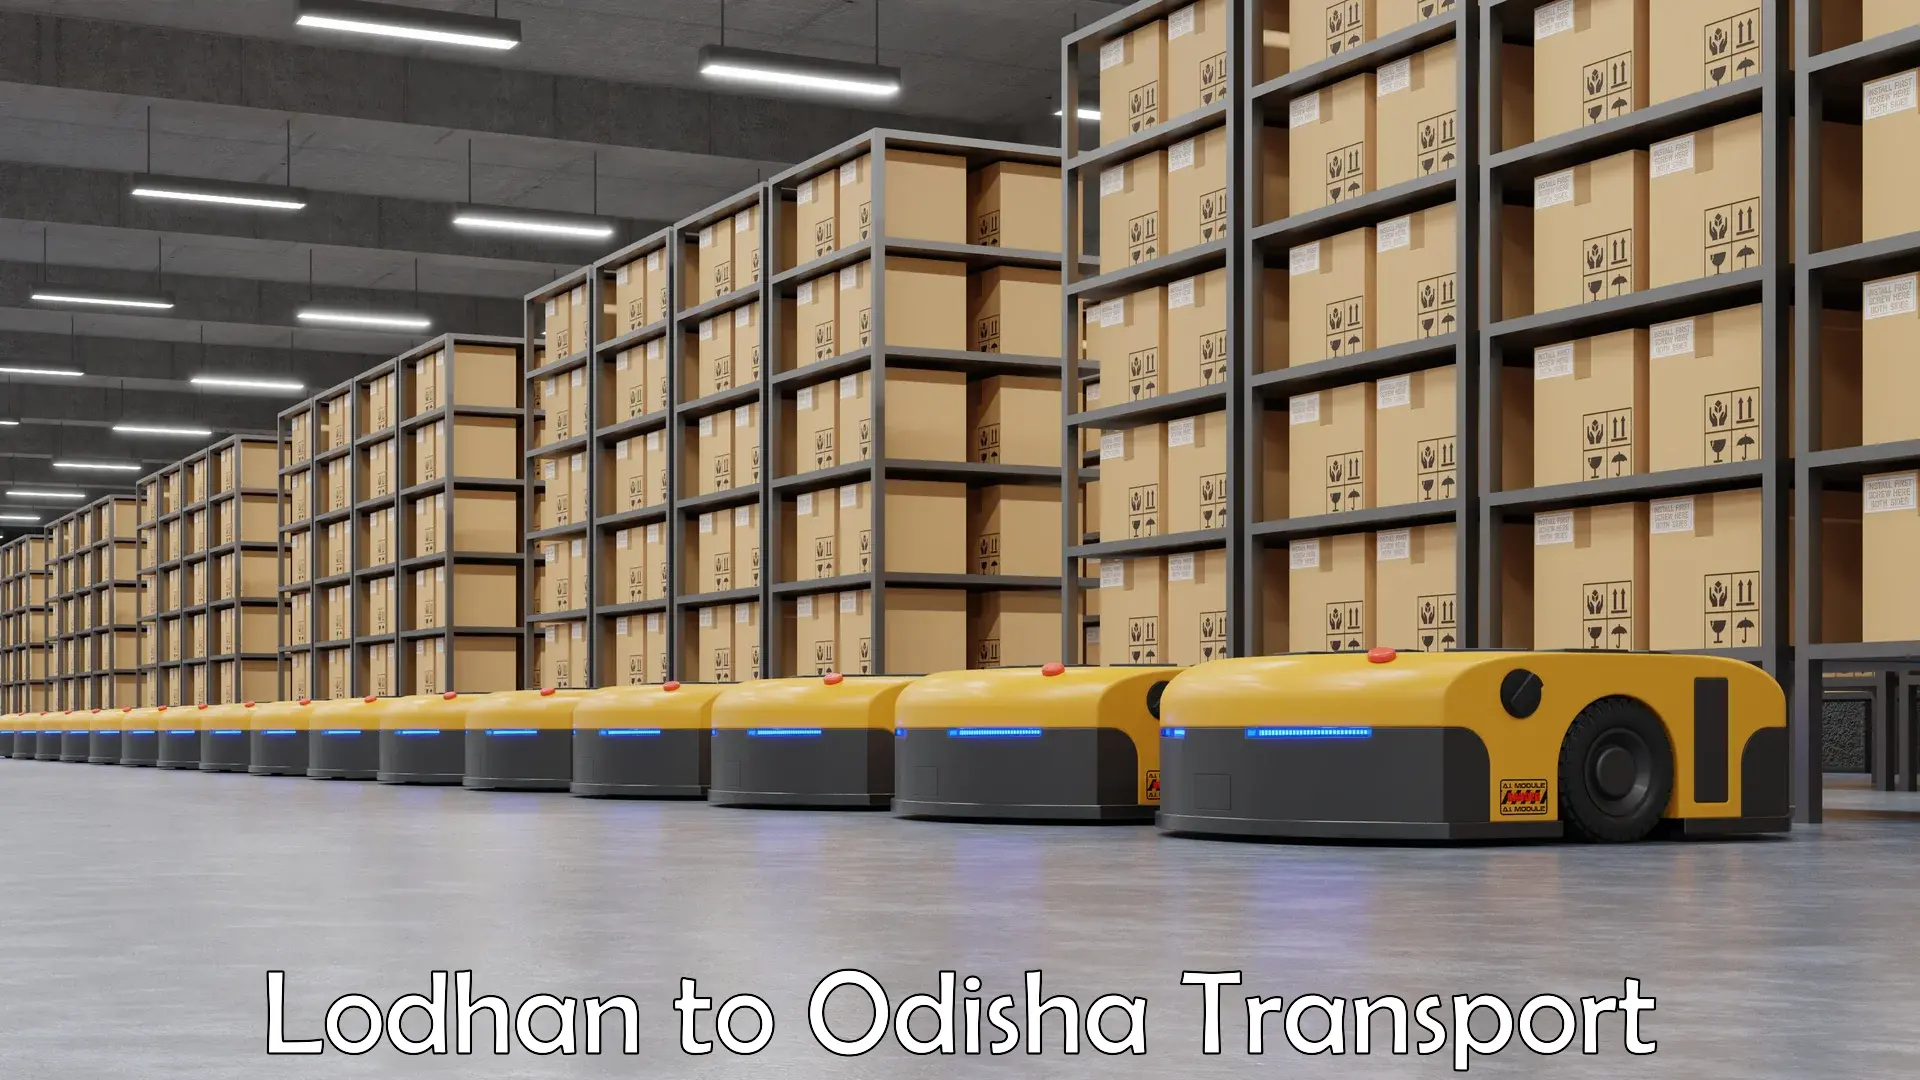 Express transport services Lodhan to Dhamanagar